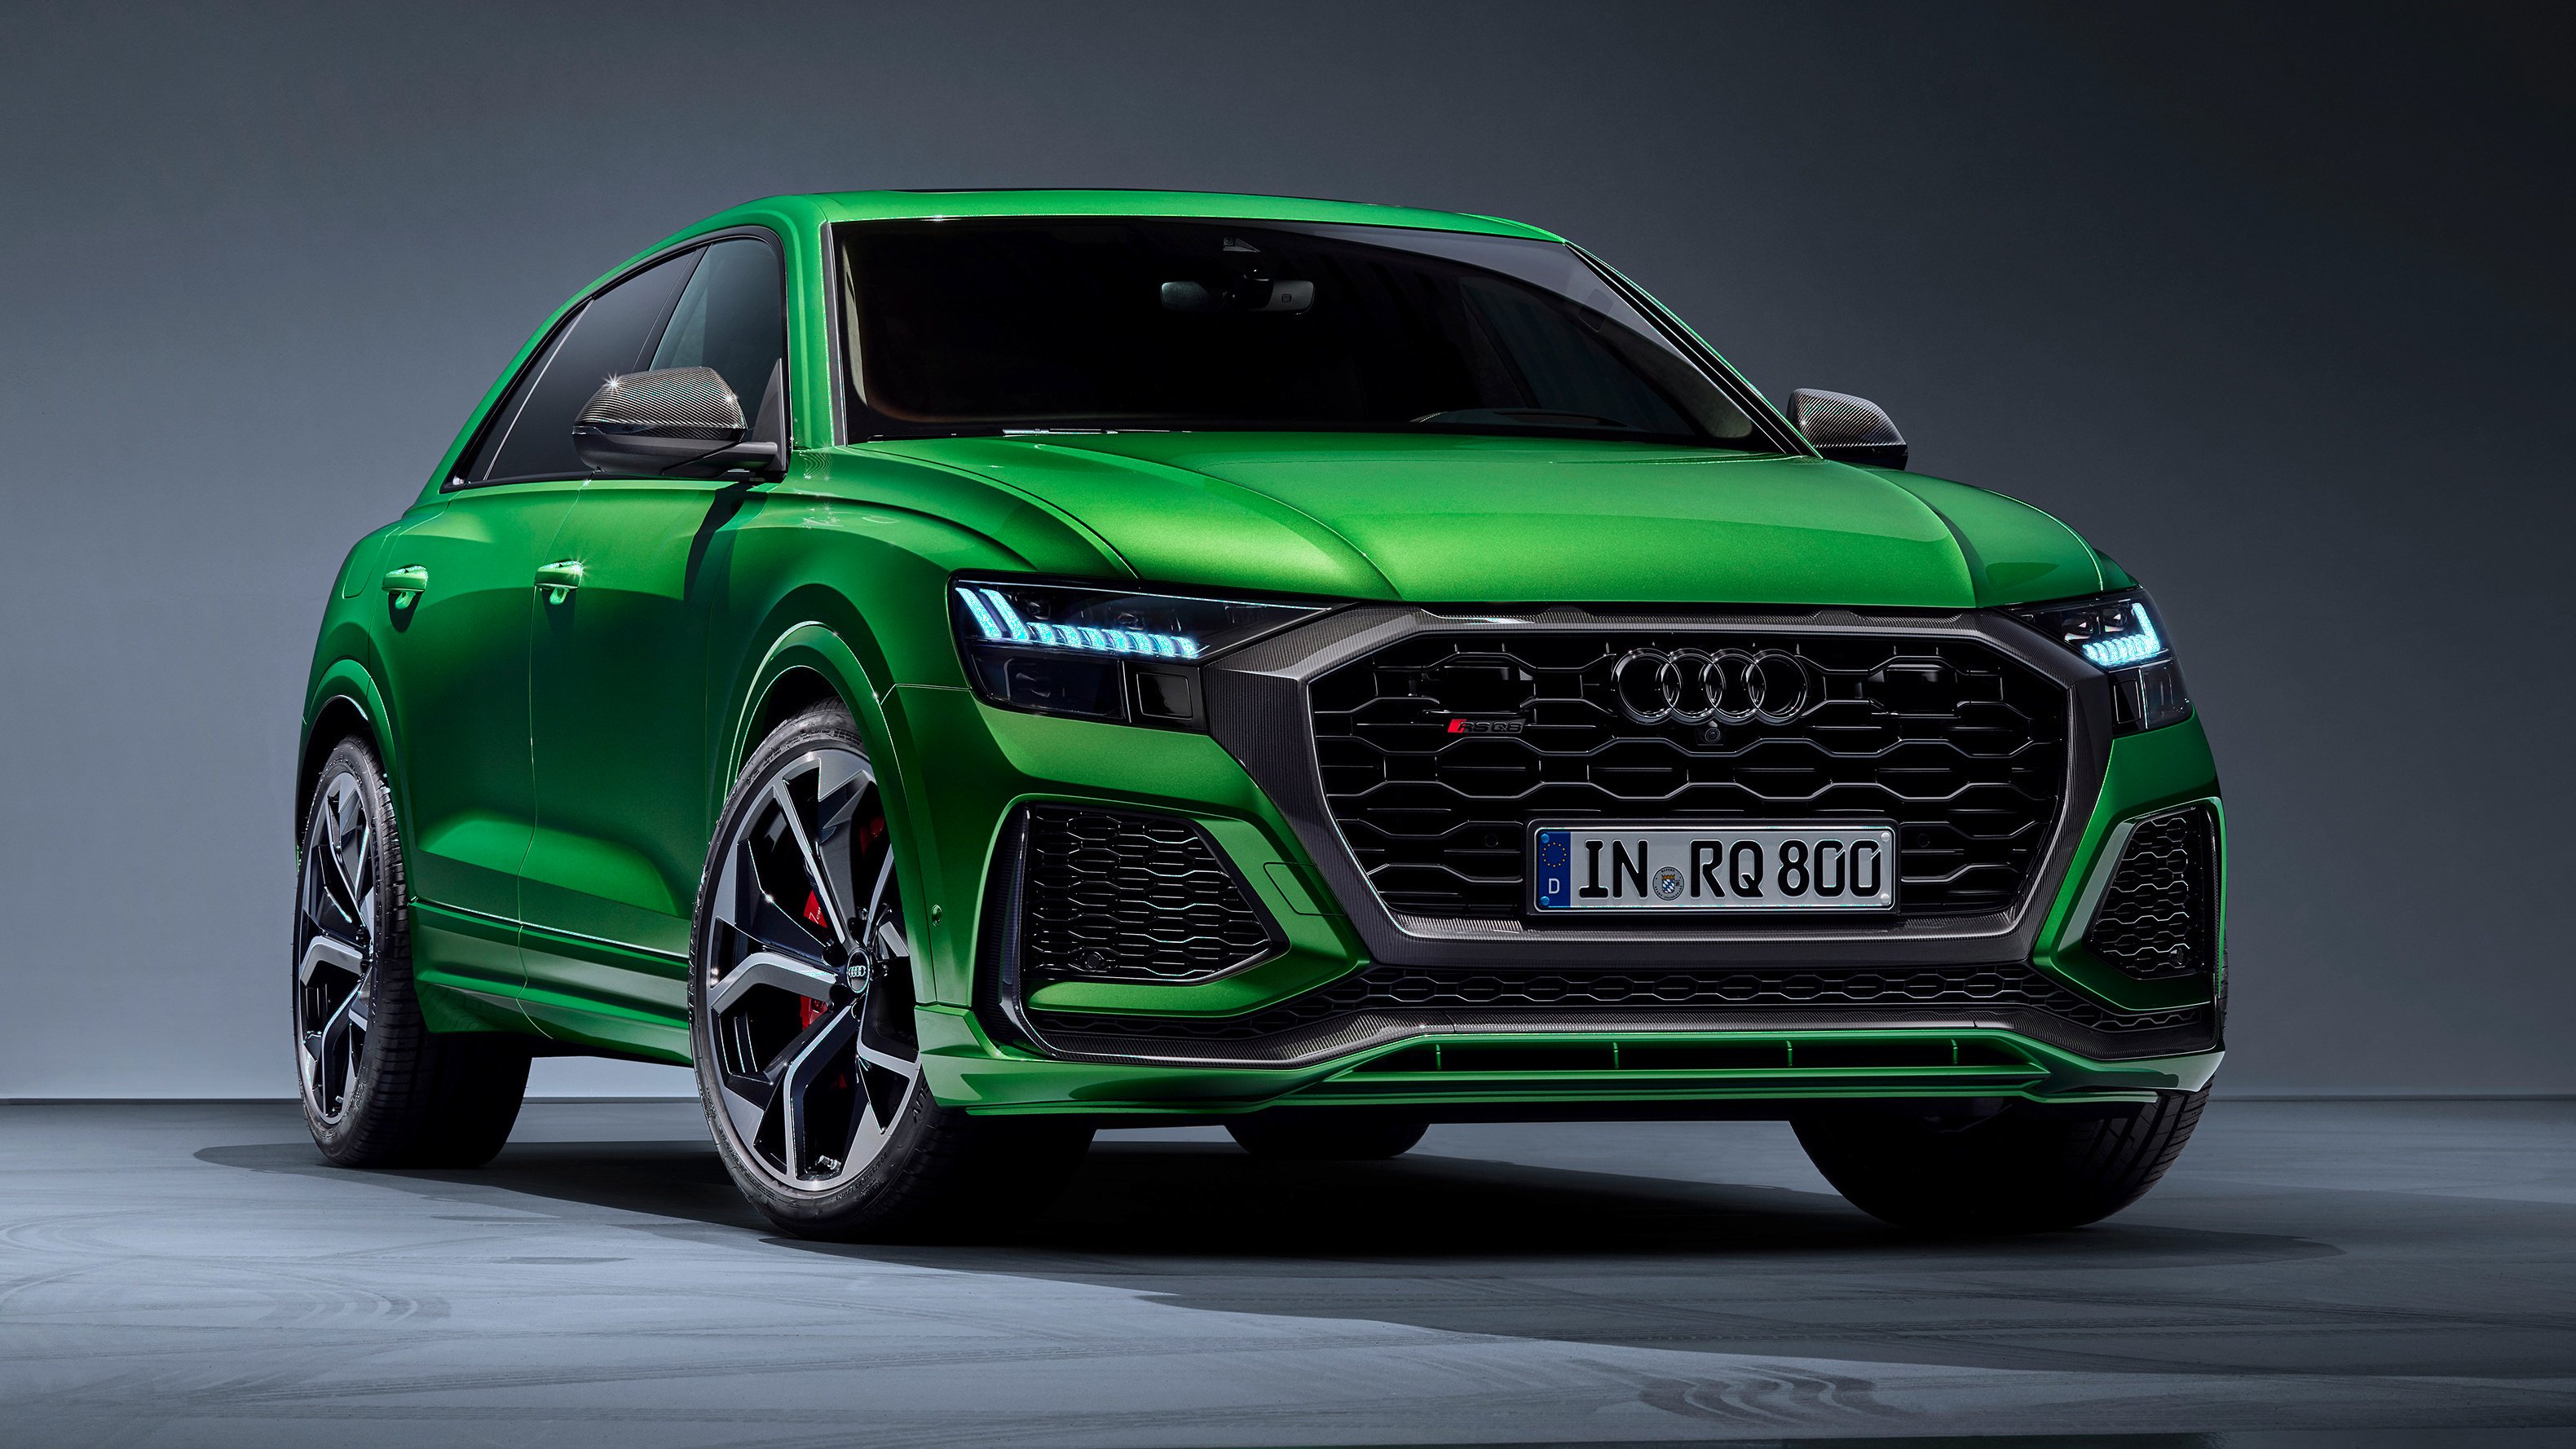 News Audi Outs RS Q8 SuperSUV